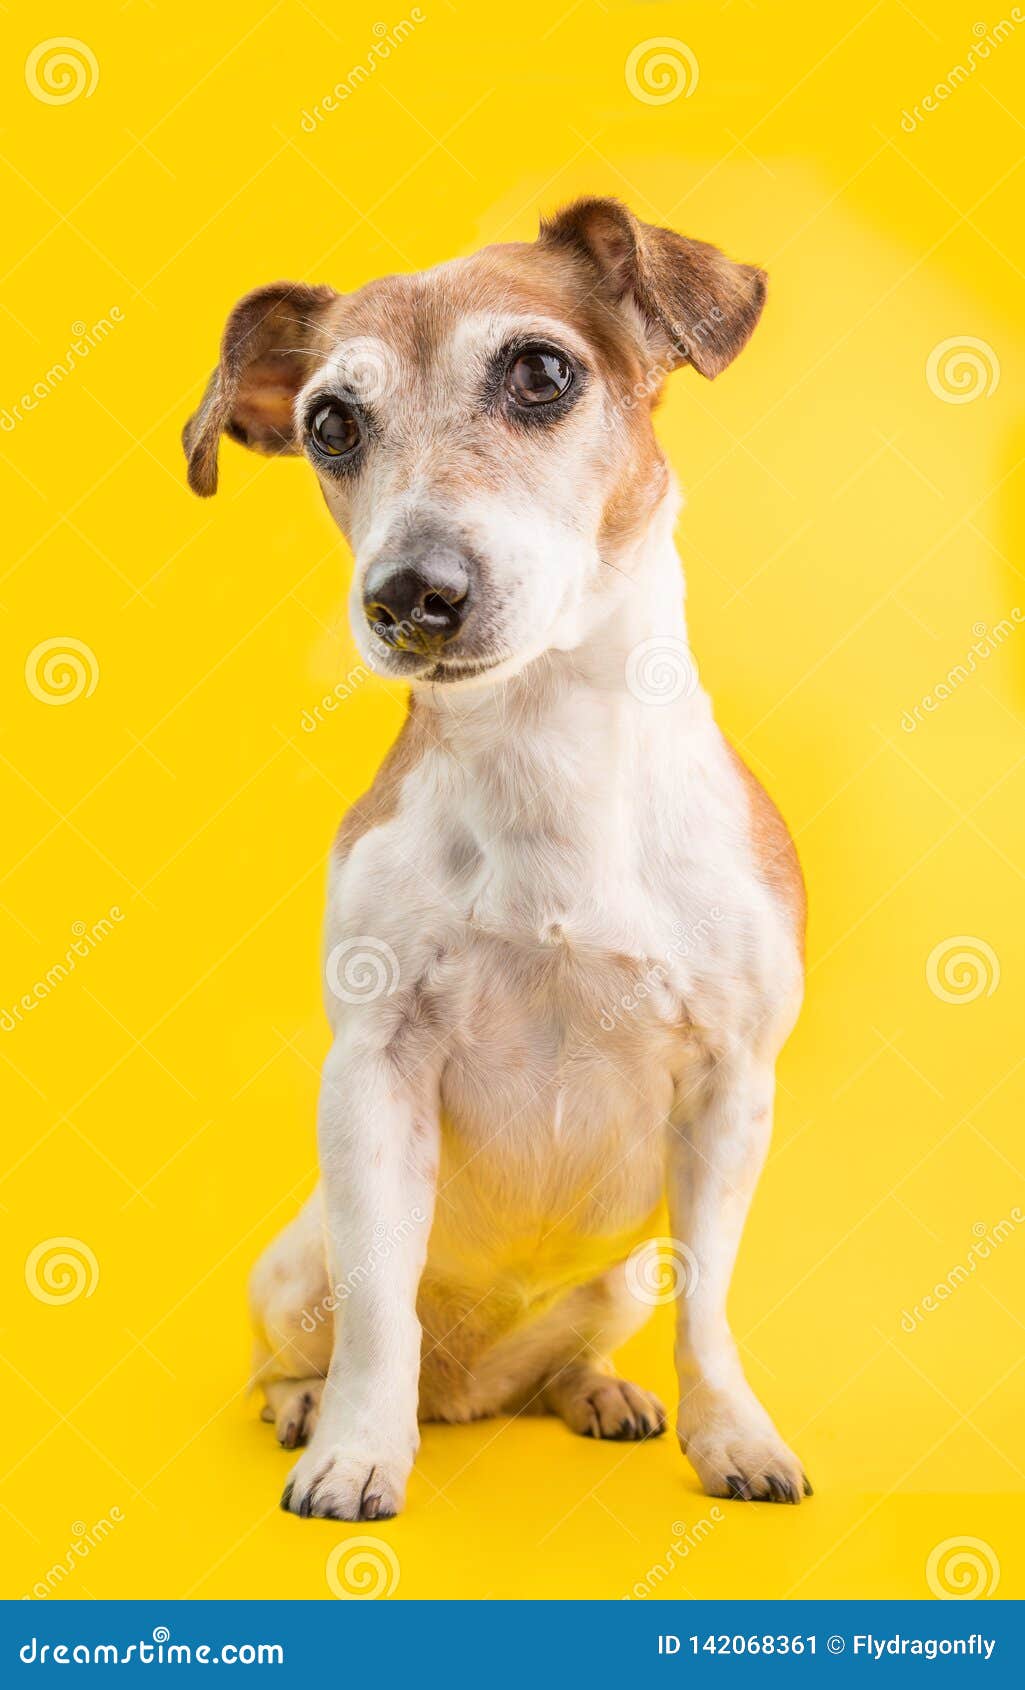 Adorable portrait of cute dog JAck Russell terrier sitting on yellow background. Lovely pet face portrait in full growth. Smart eyes